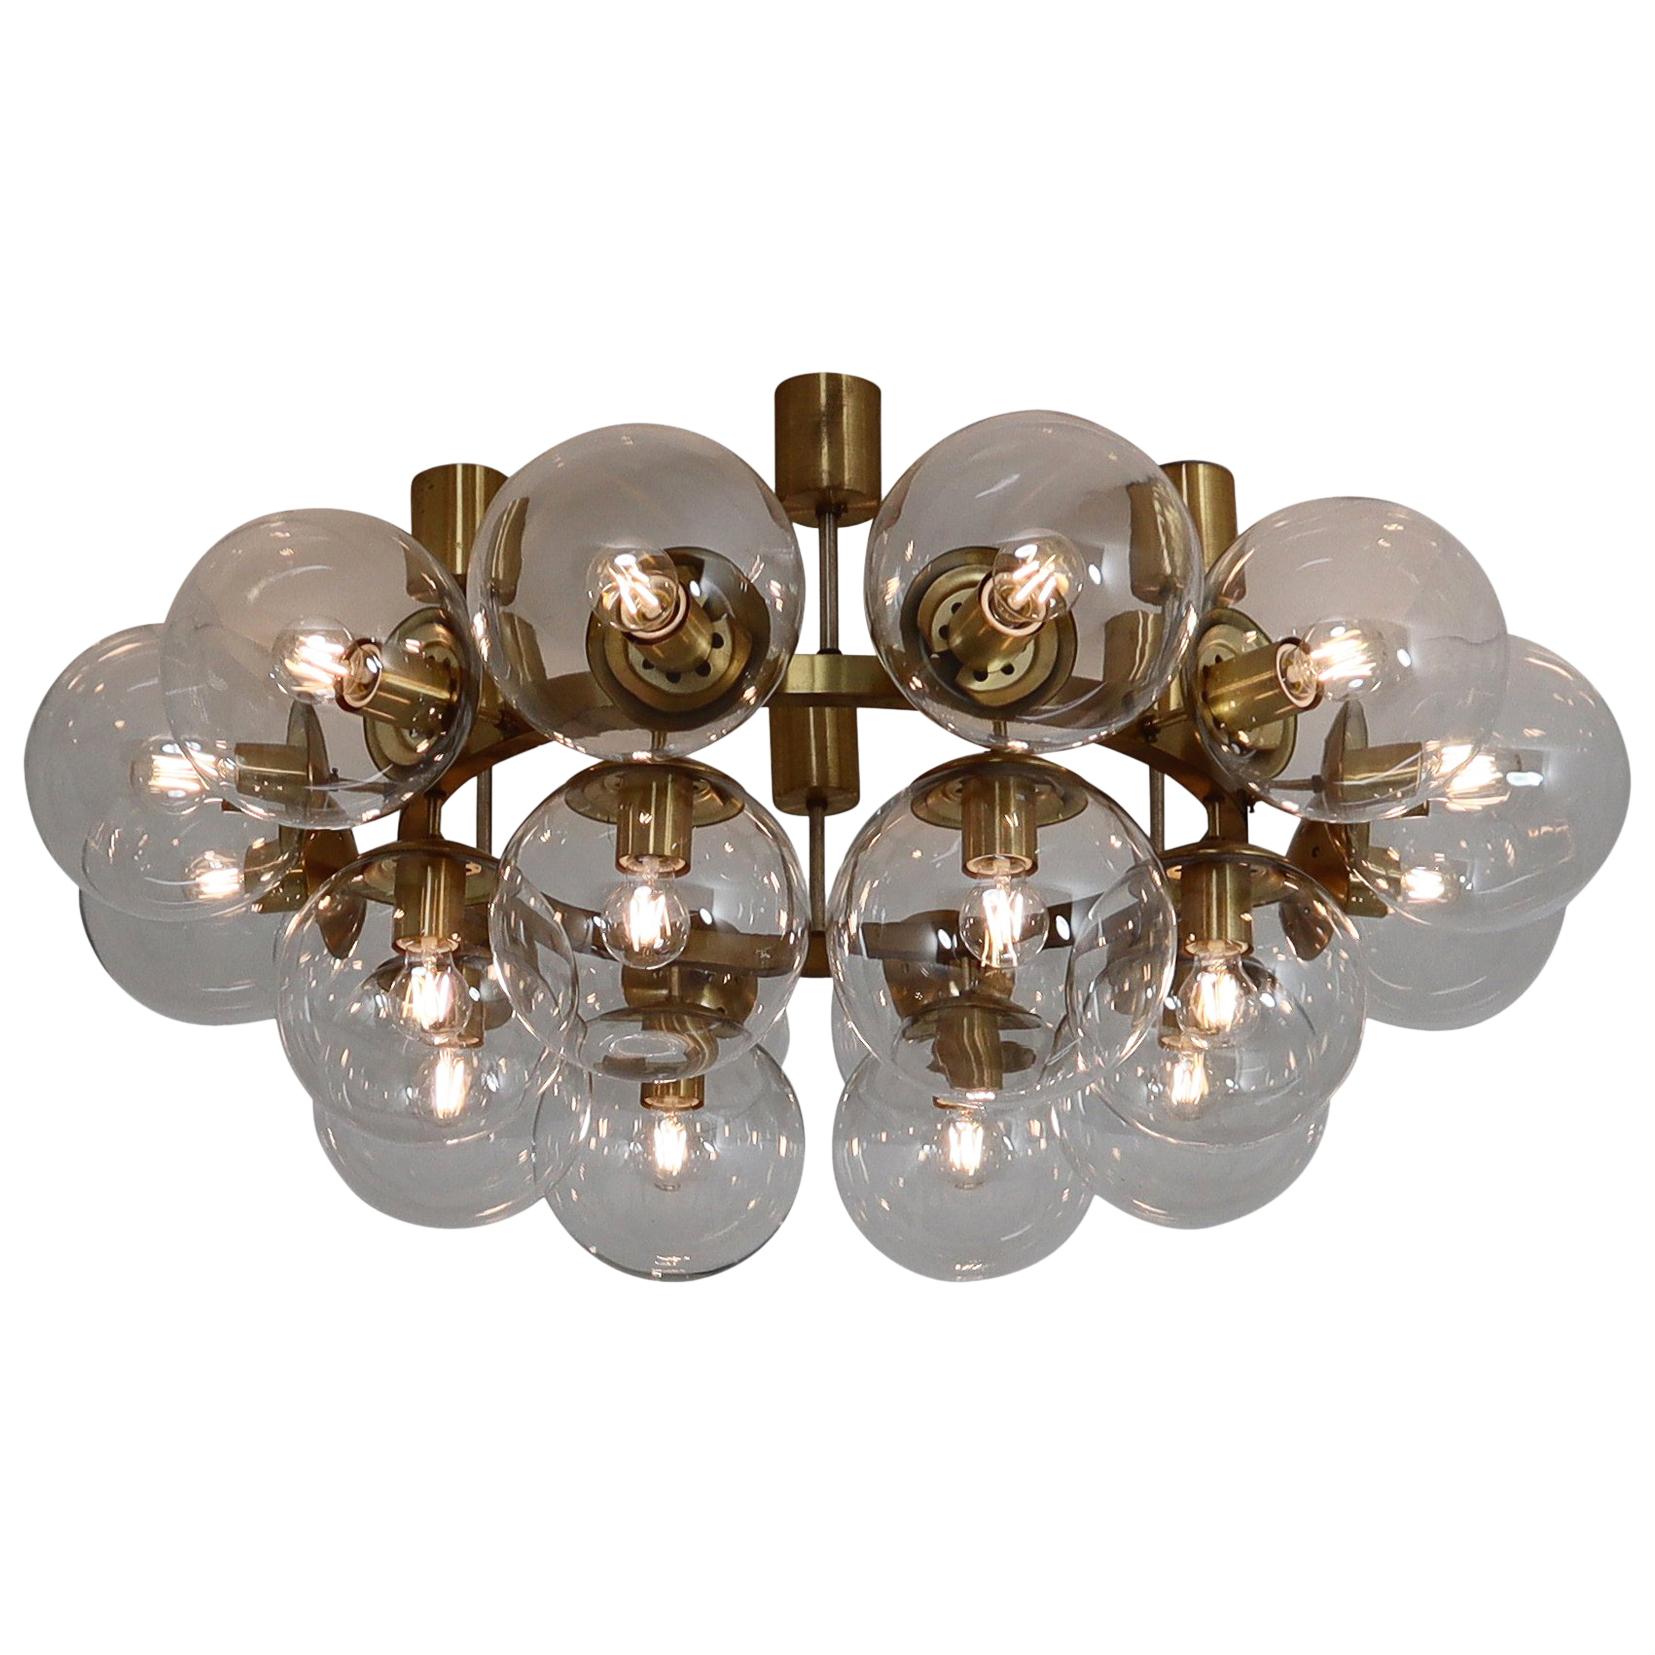 Large Hotel Chandelier in Brass Fixture and 20 Large Hand-Blowed Glass Globes 